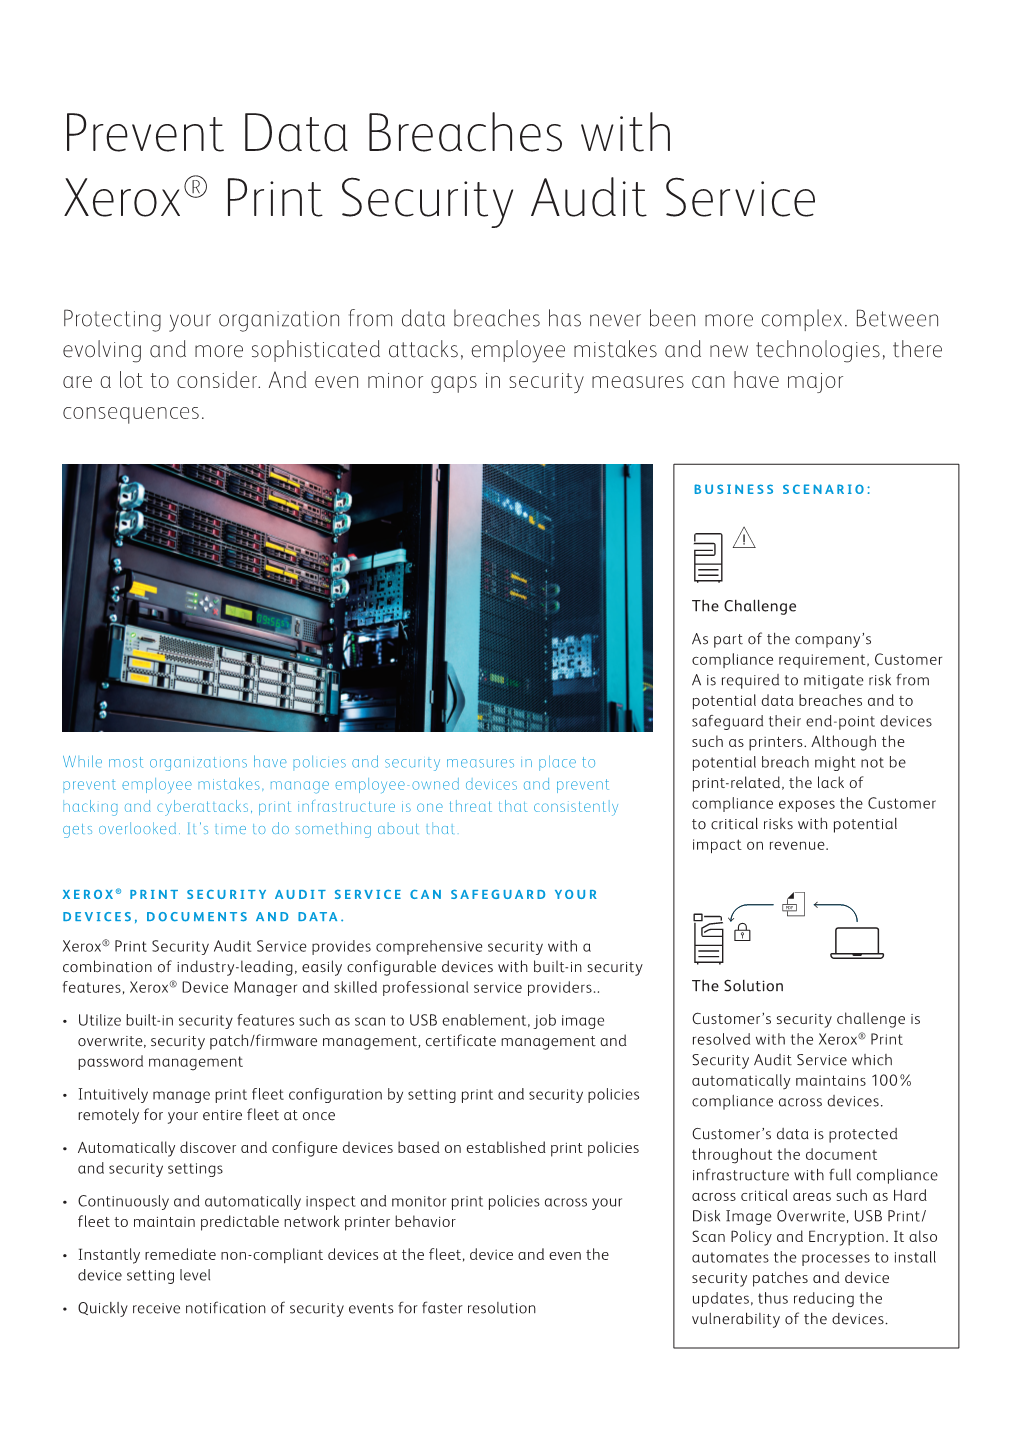 Xerox Print Security Audit Service Brochure V5.Indd